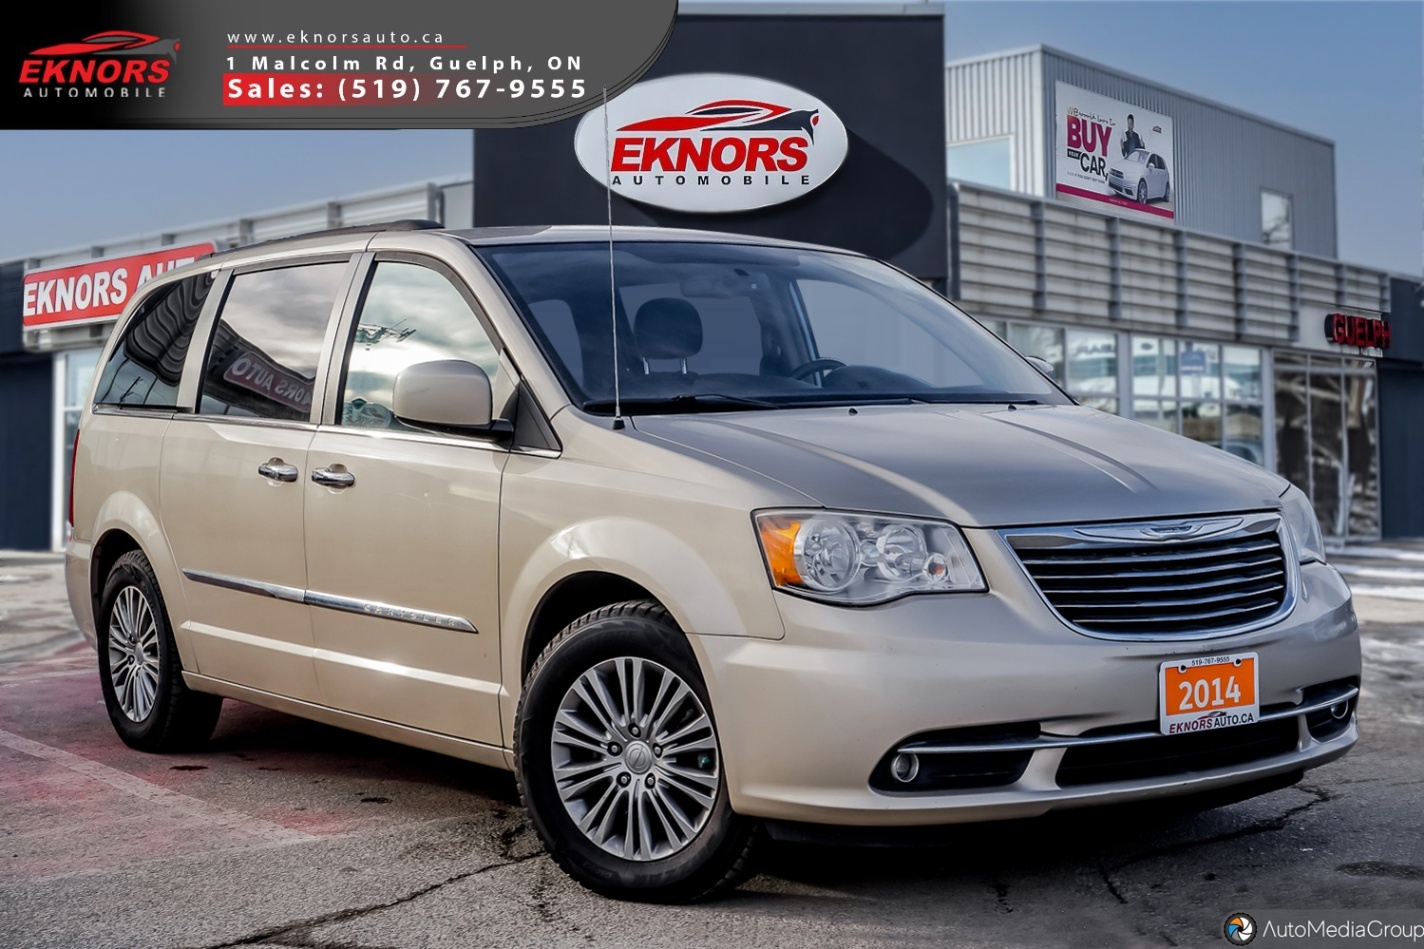 2014 Chrysler Town & Country 4dr Wgn Touring w/Leather